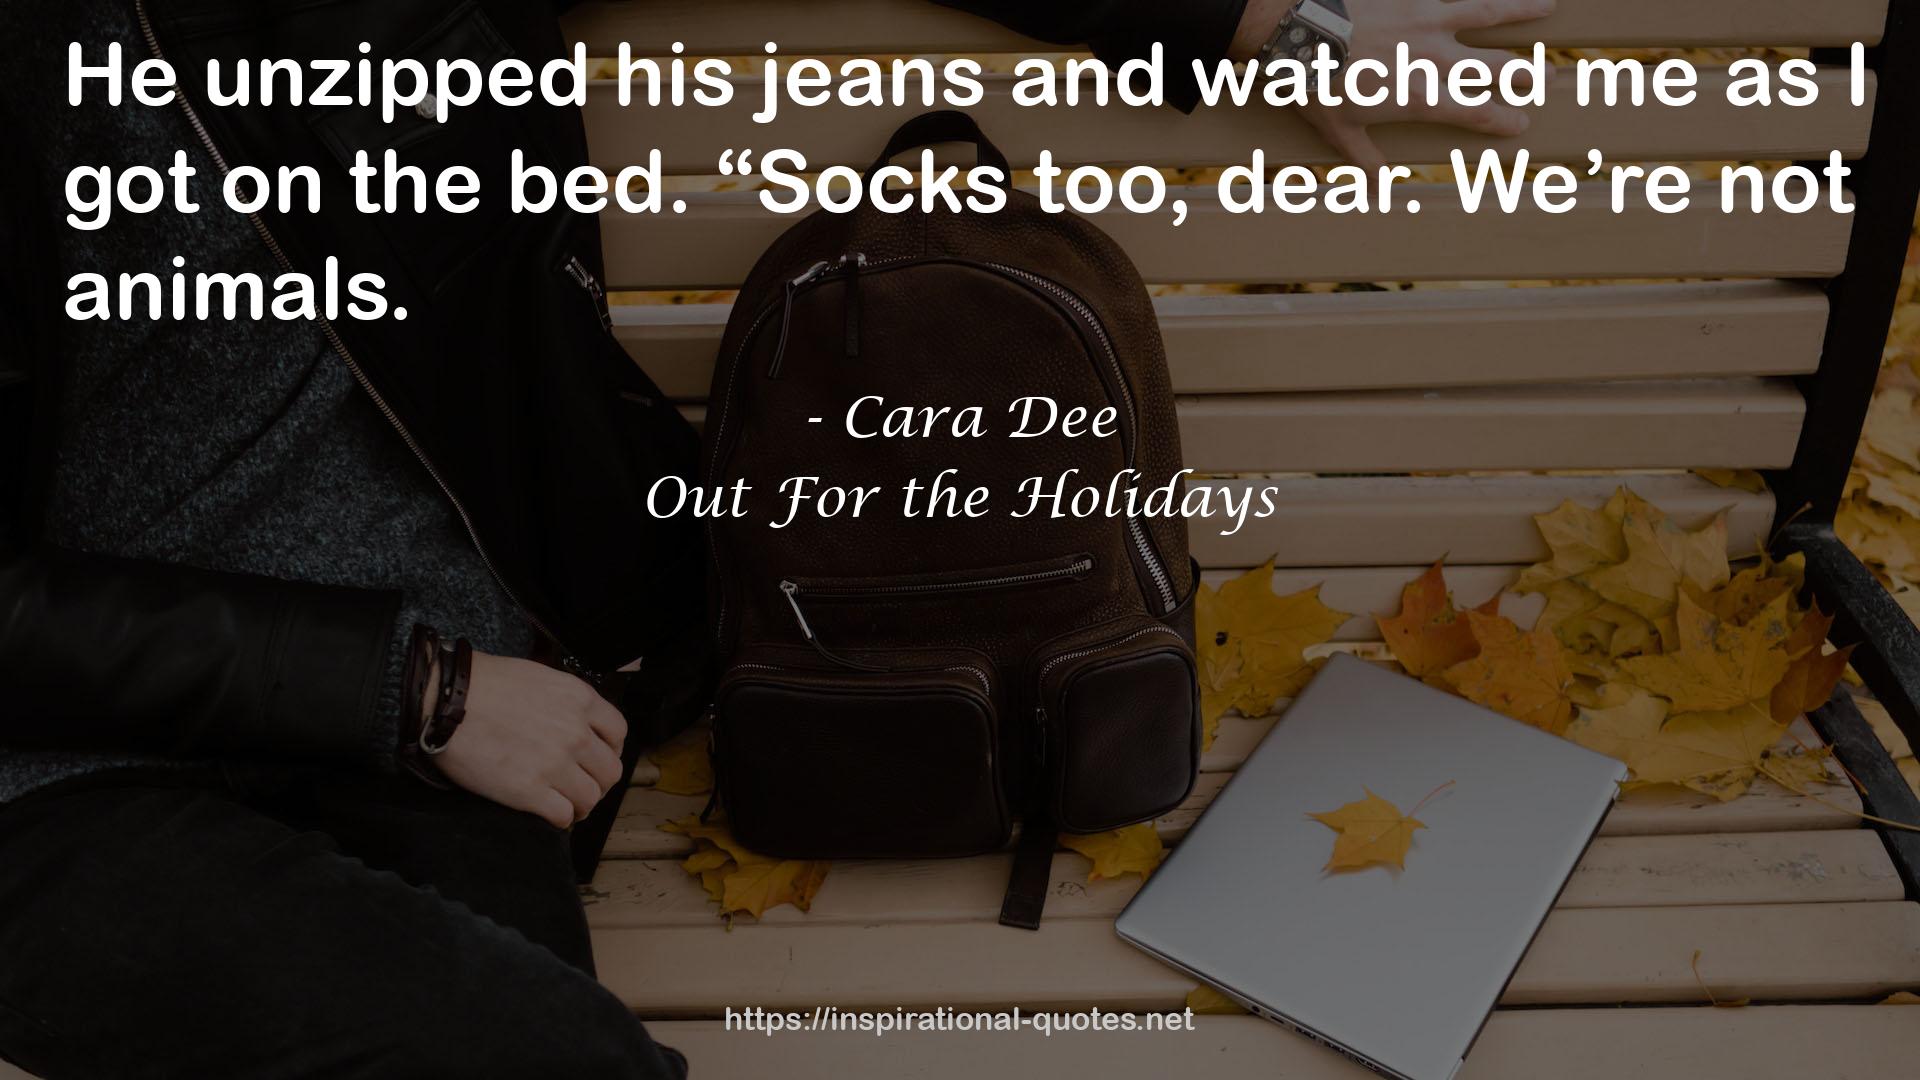 Out For the Holidays QUOTES